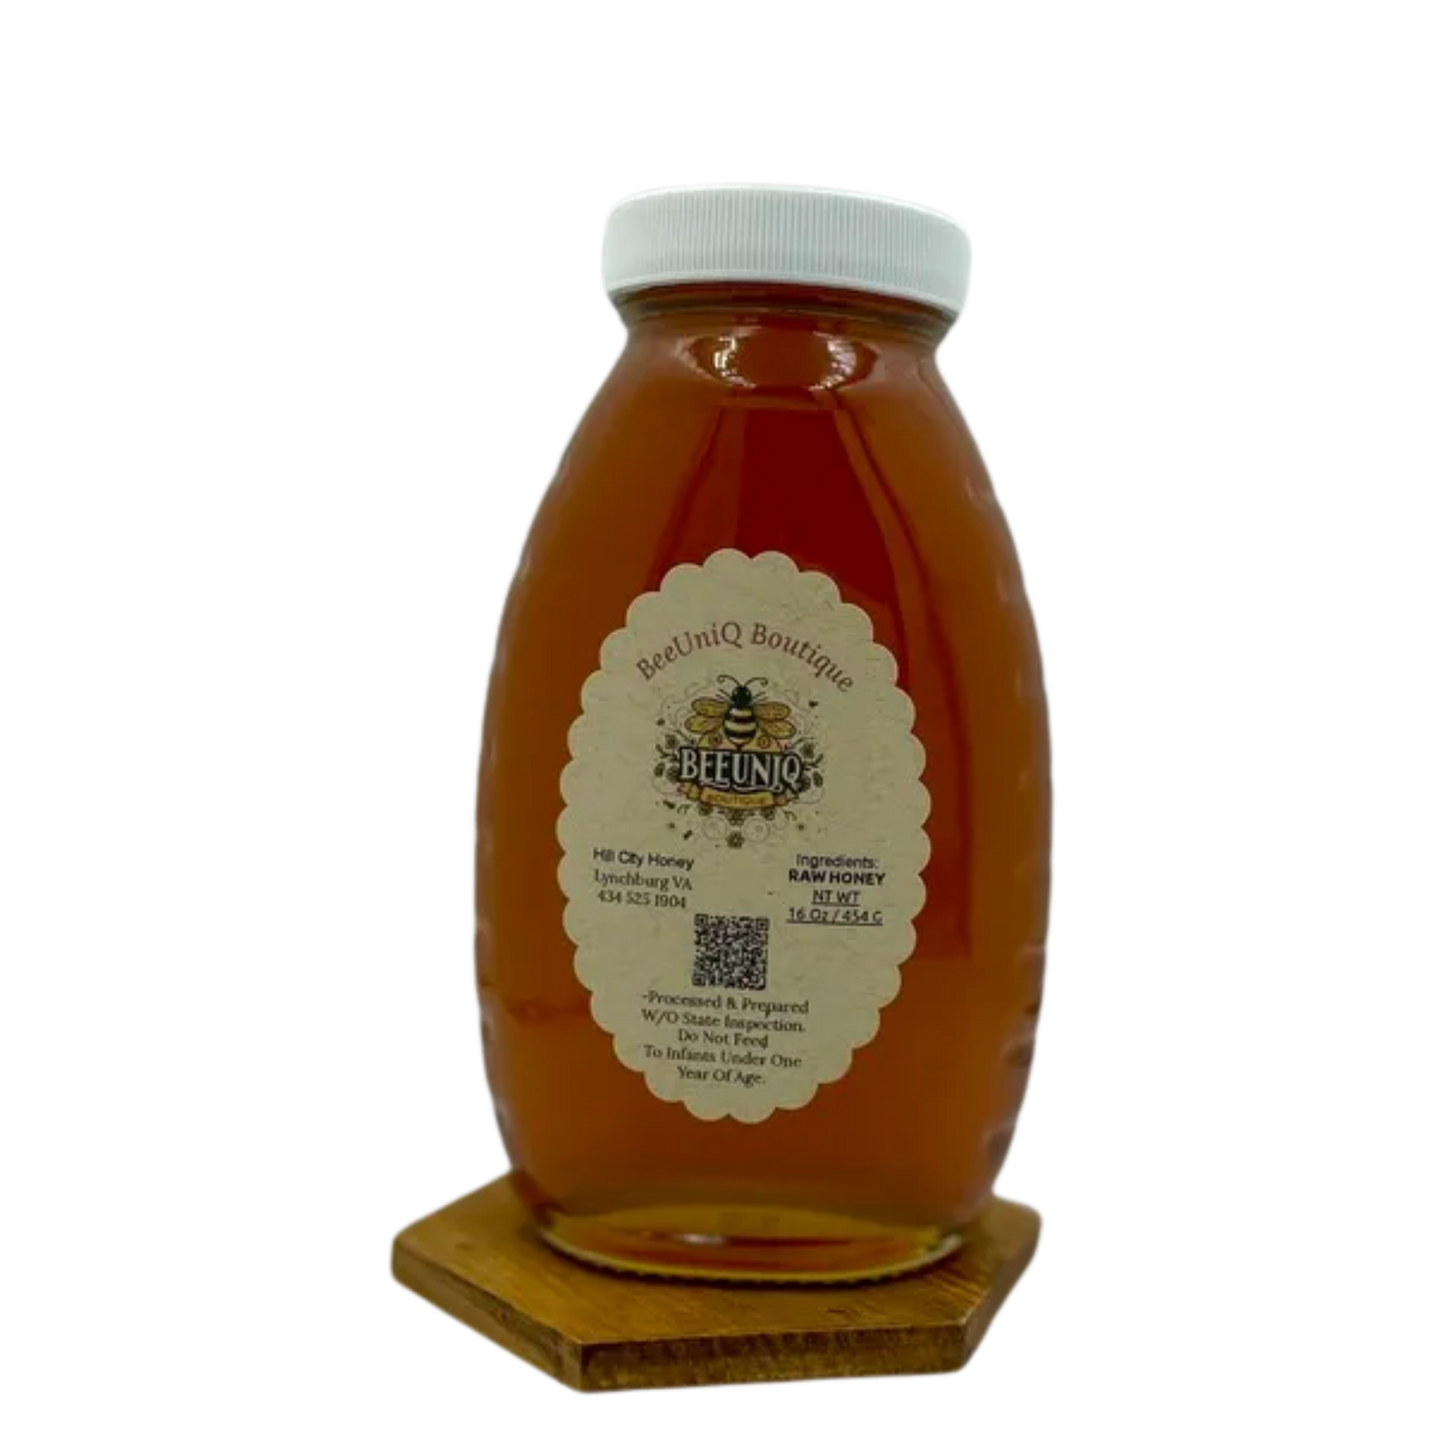 Raw Honey for all Occasions